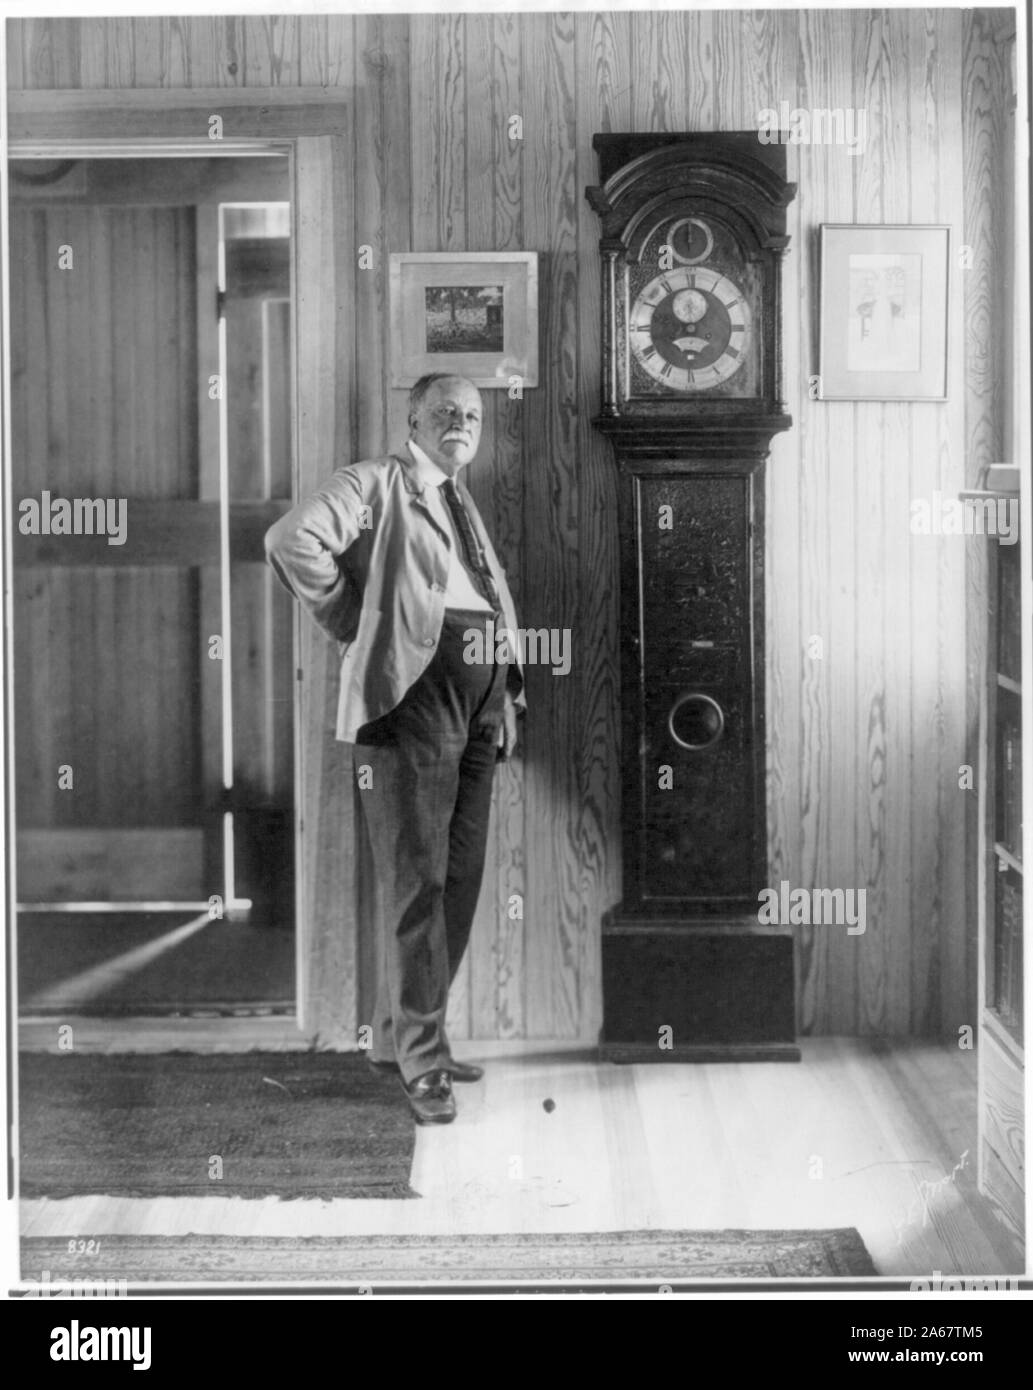 William Dean Howells, 1837-1920, full length portrait, facing right, standing by grandfather clock Stock Photo